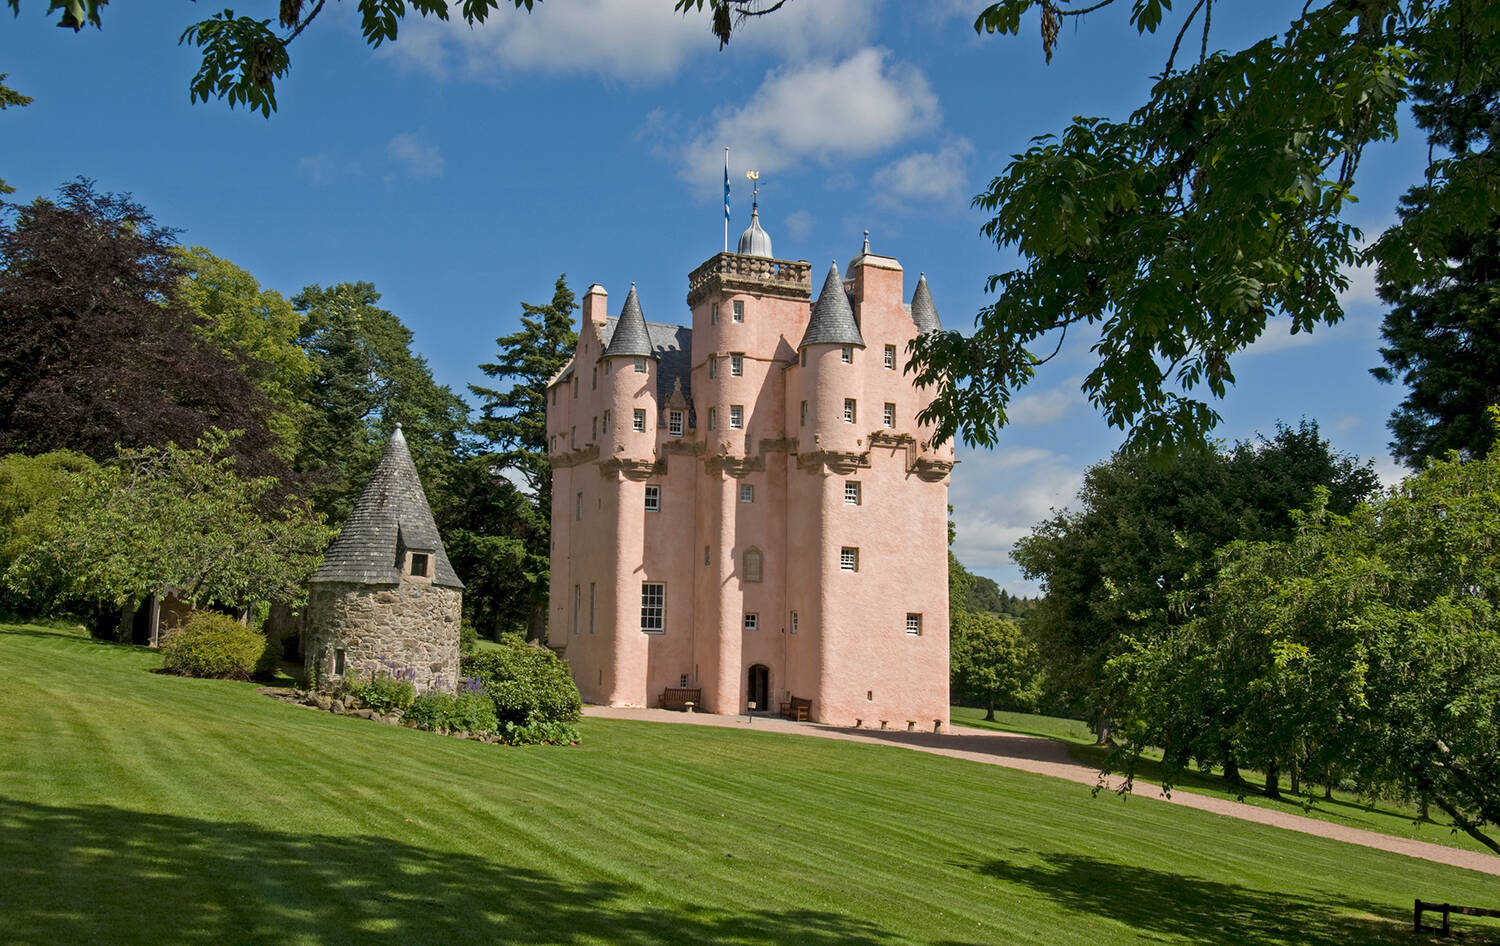 Craigievar Castle, a pink castle with turrets surrounded by a grassy lawn, with trees in the background.